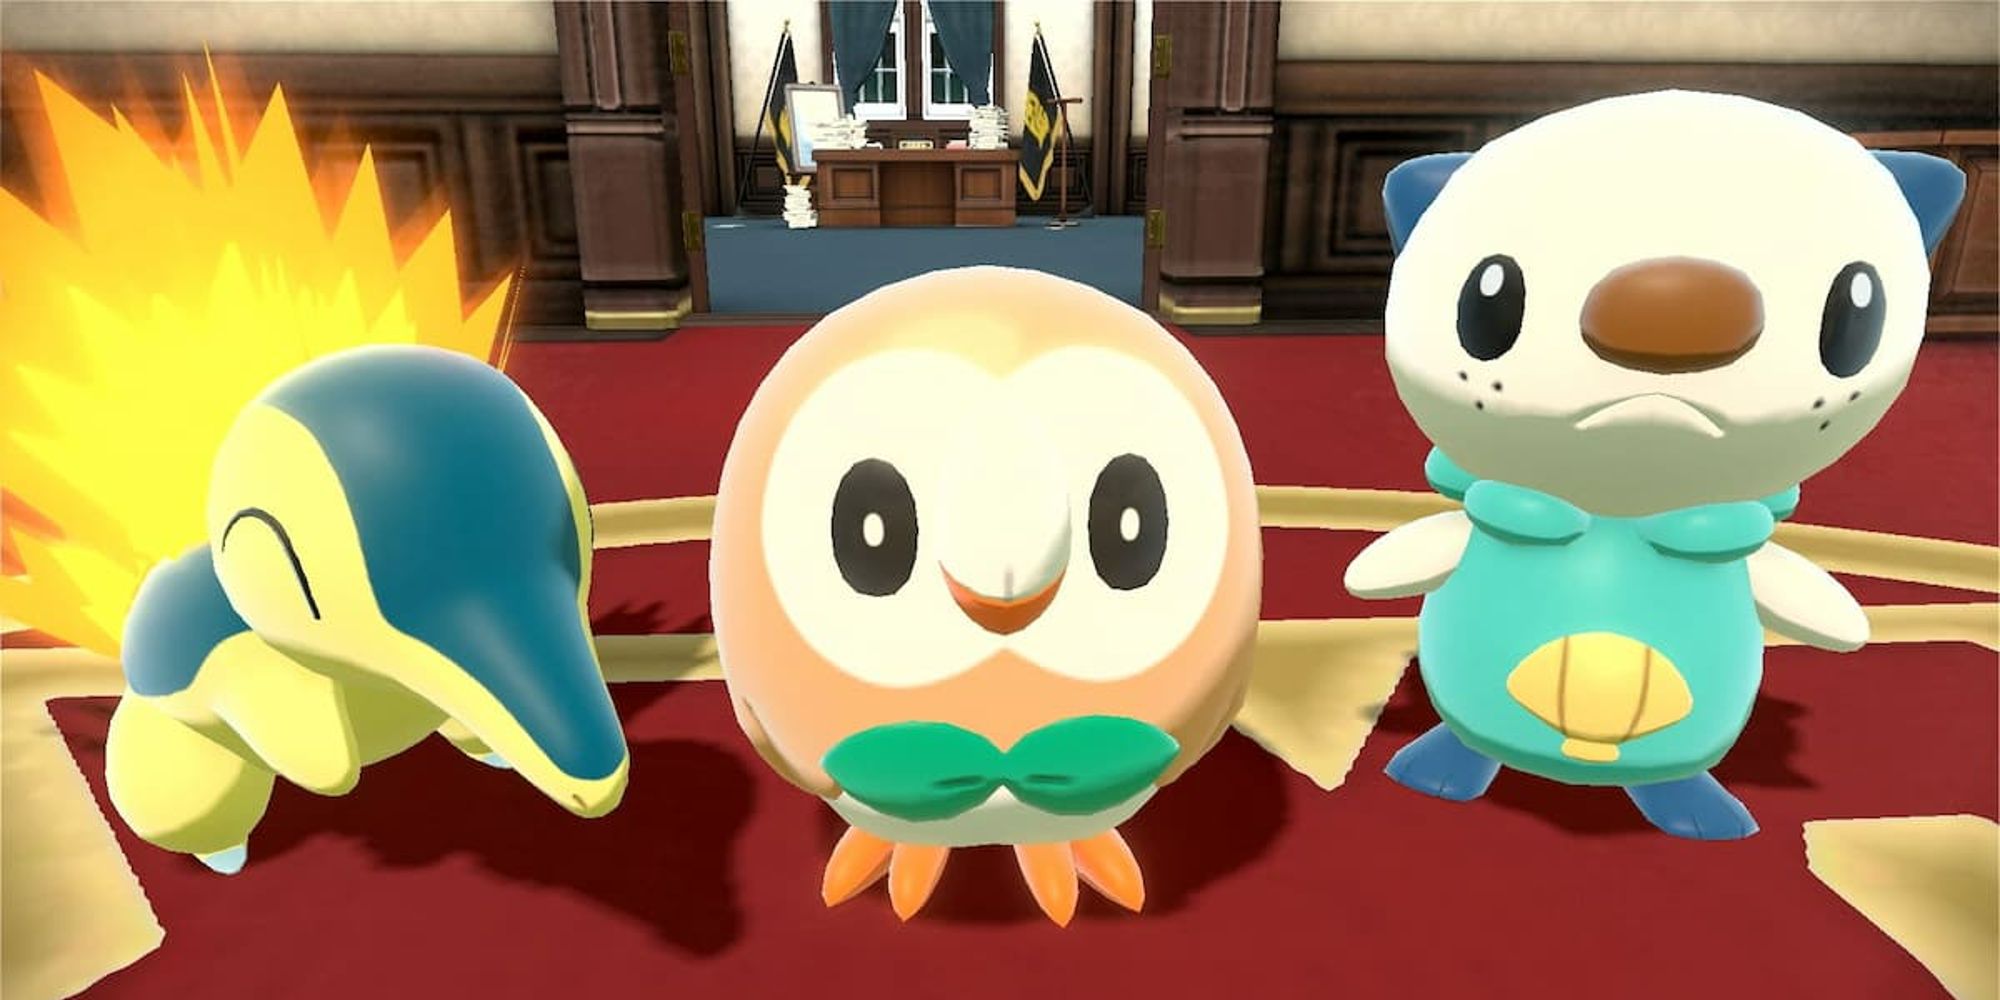 From left to right, Cyndaquil, Rowlet and Oshawott in Pokemon Legends Arceus